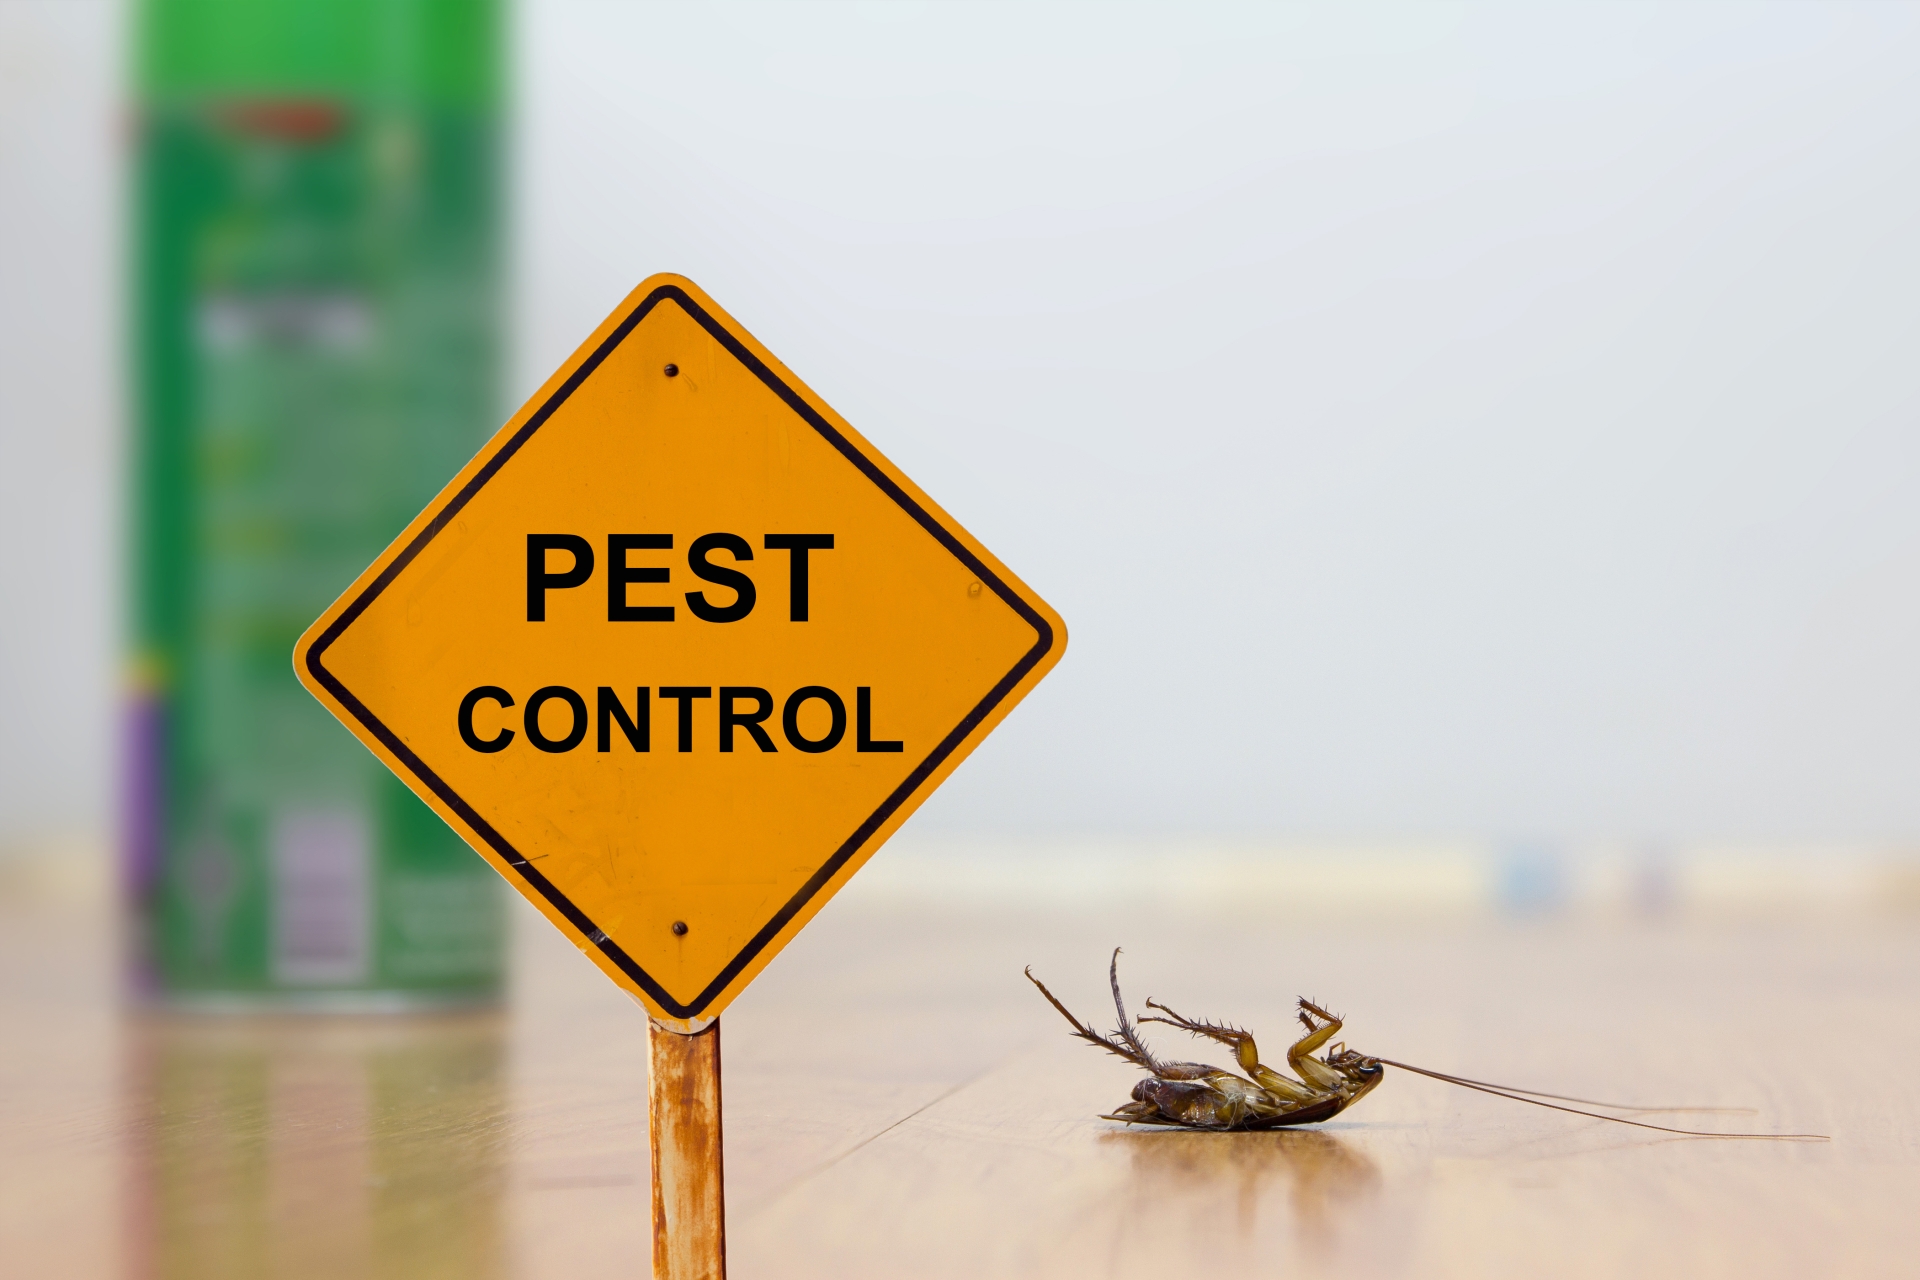 24 Hour Pest Control, Pest Control in Nine Elms, SW8. Call Now 020 8166 9746